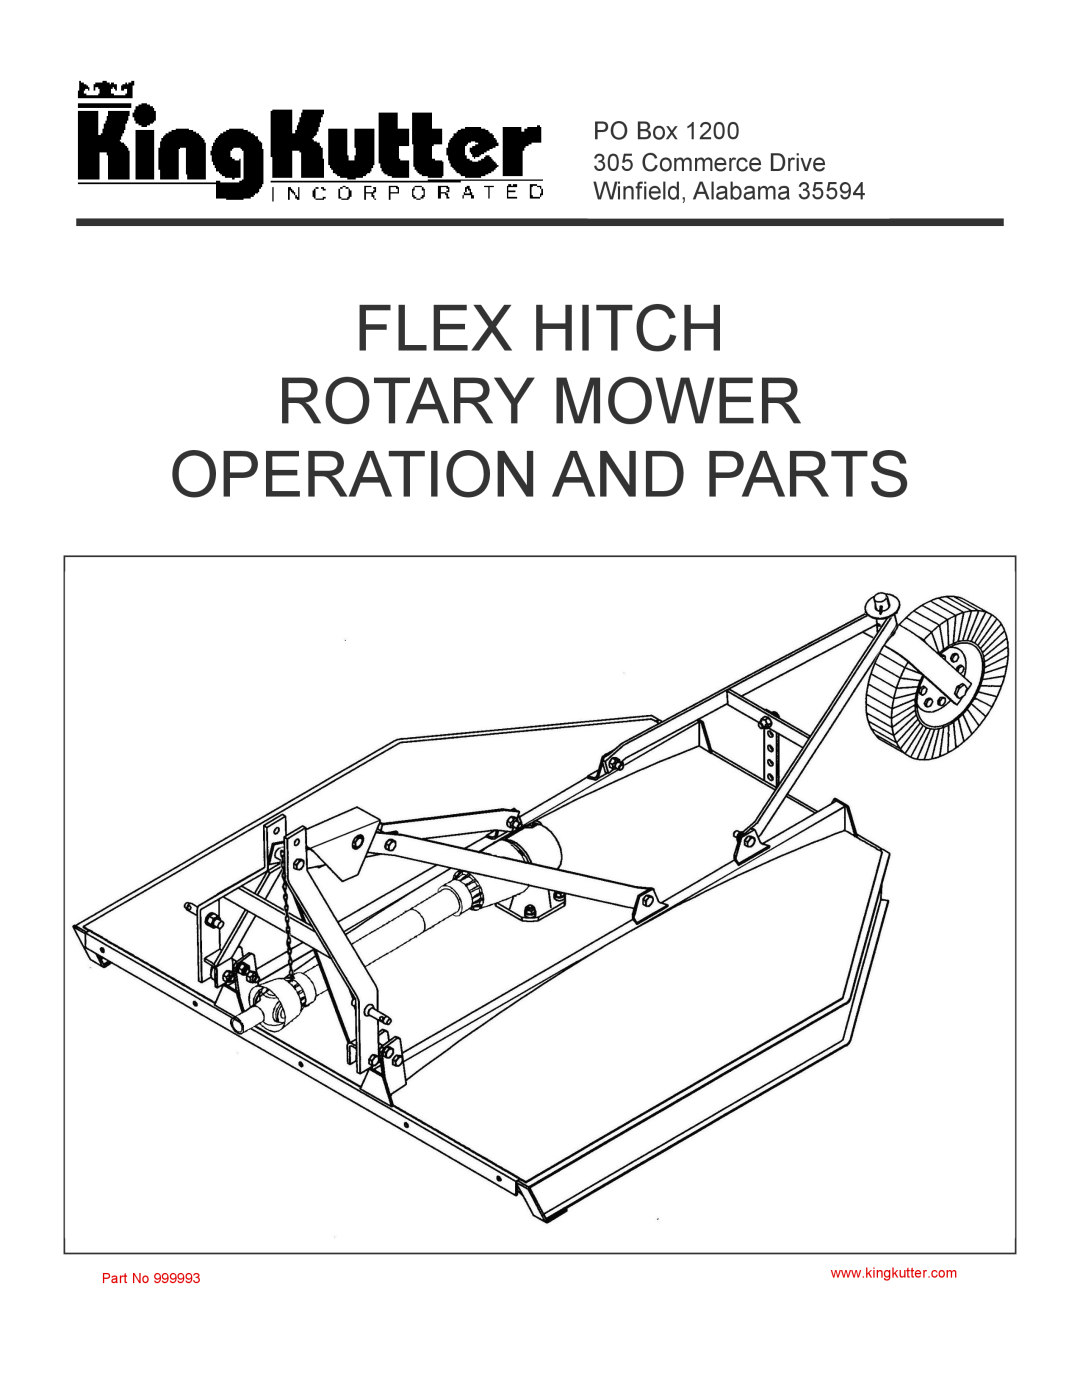 King Kutter Part No 999993 manual Flex Hitch Rotary Mower Operation And Parts, PO Box 305 Commerce Drive Winfield, Alabama 